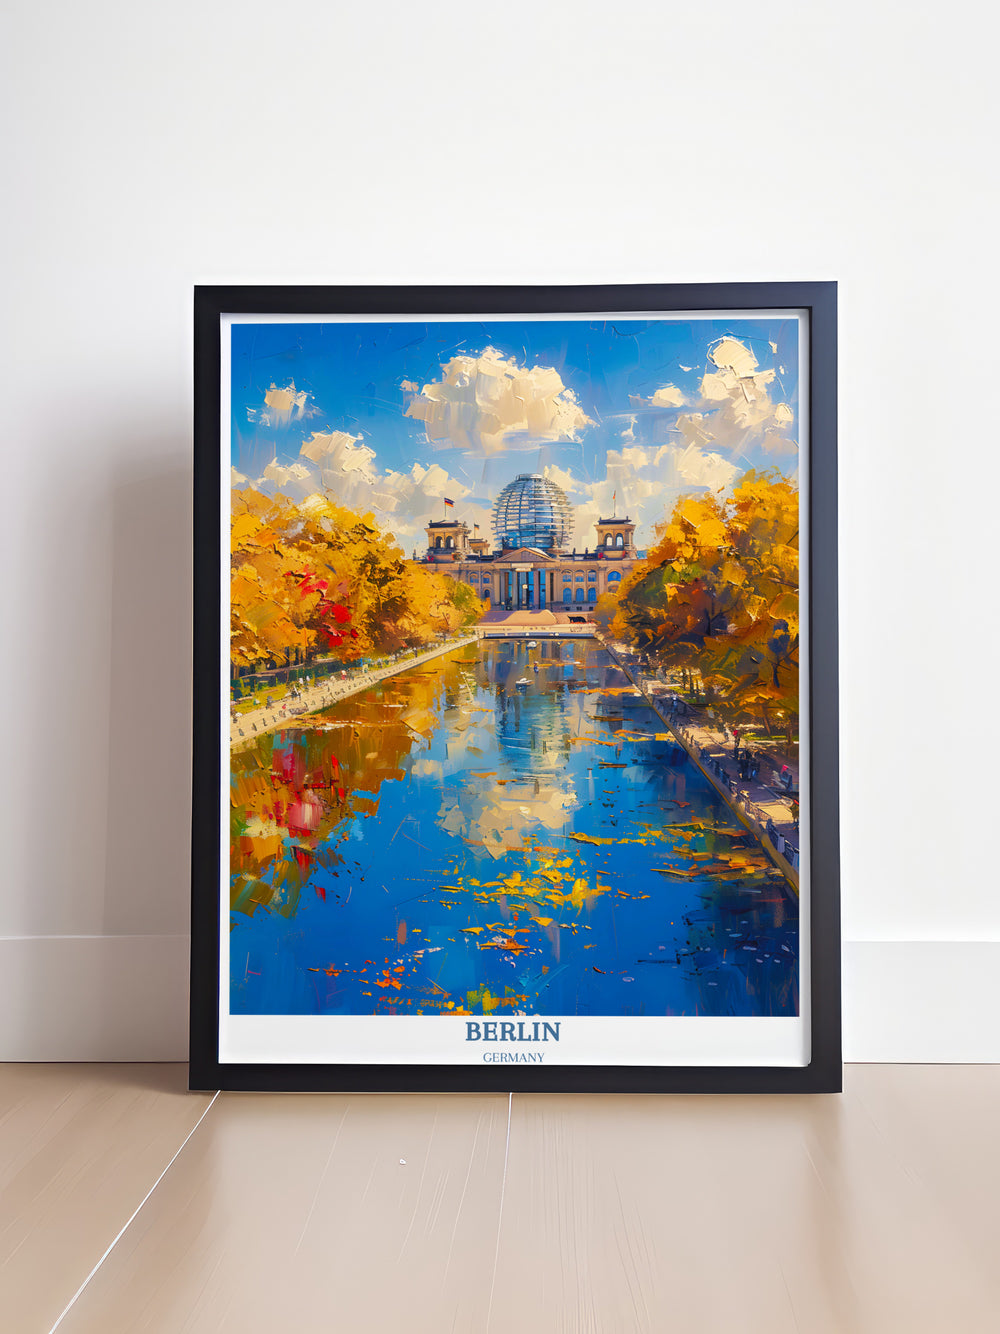 Discover Berlins splendor with this travel print capturing the Reichstag Building. An elegant addition to any décor.